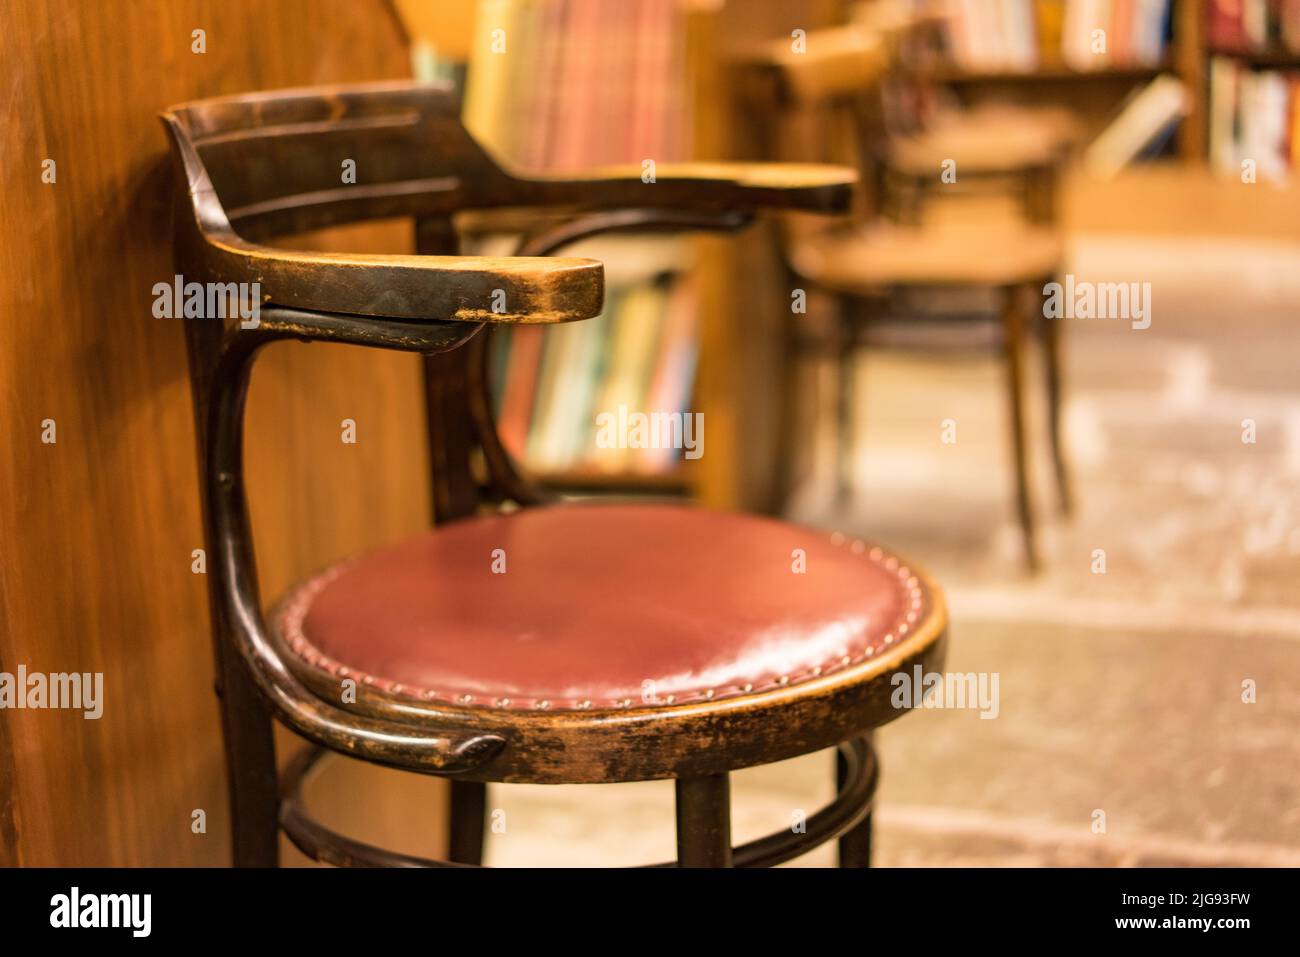 Chair in a book shop Stock Photo